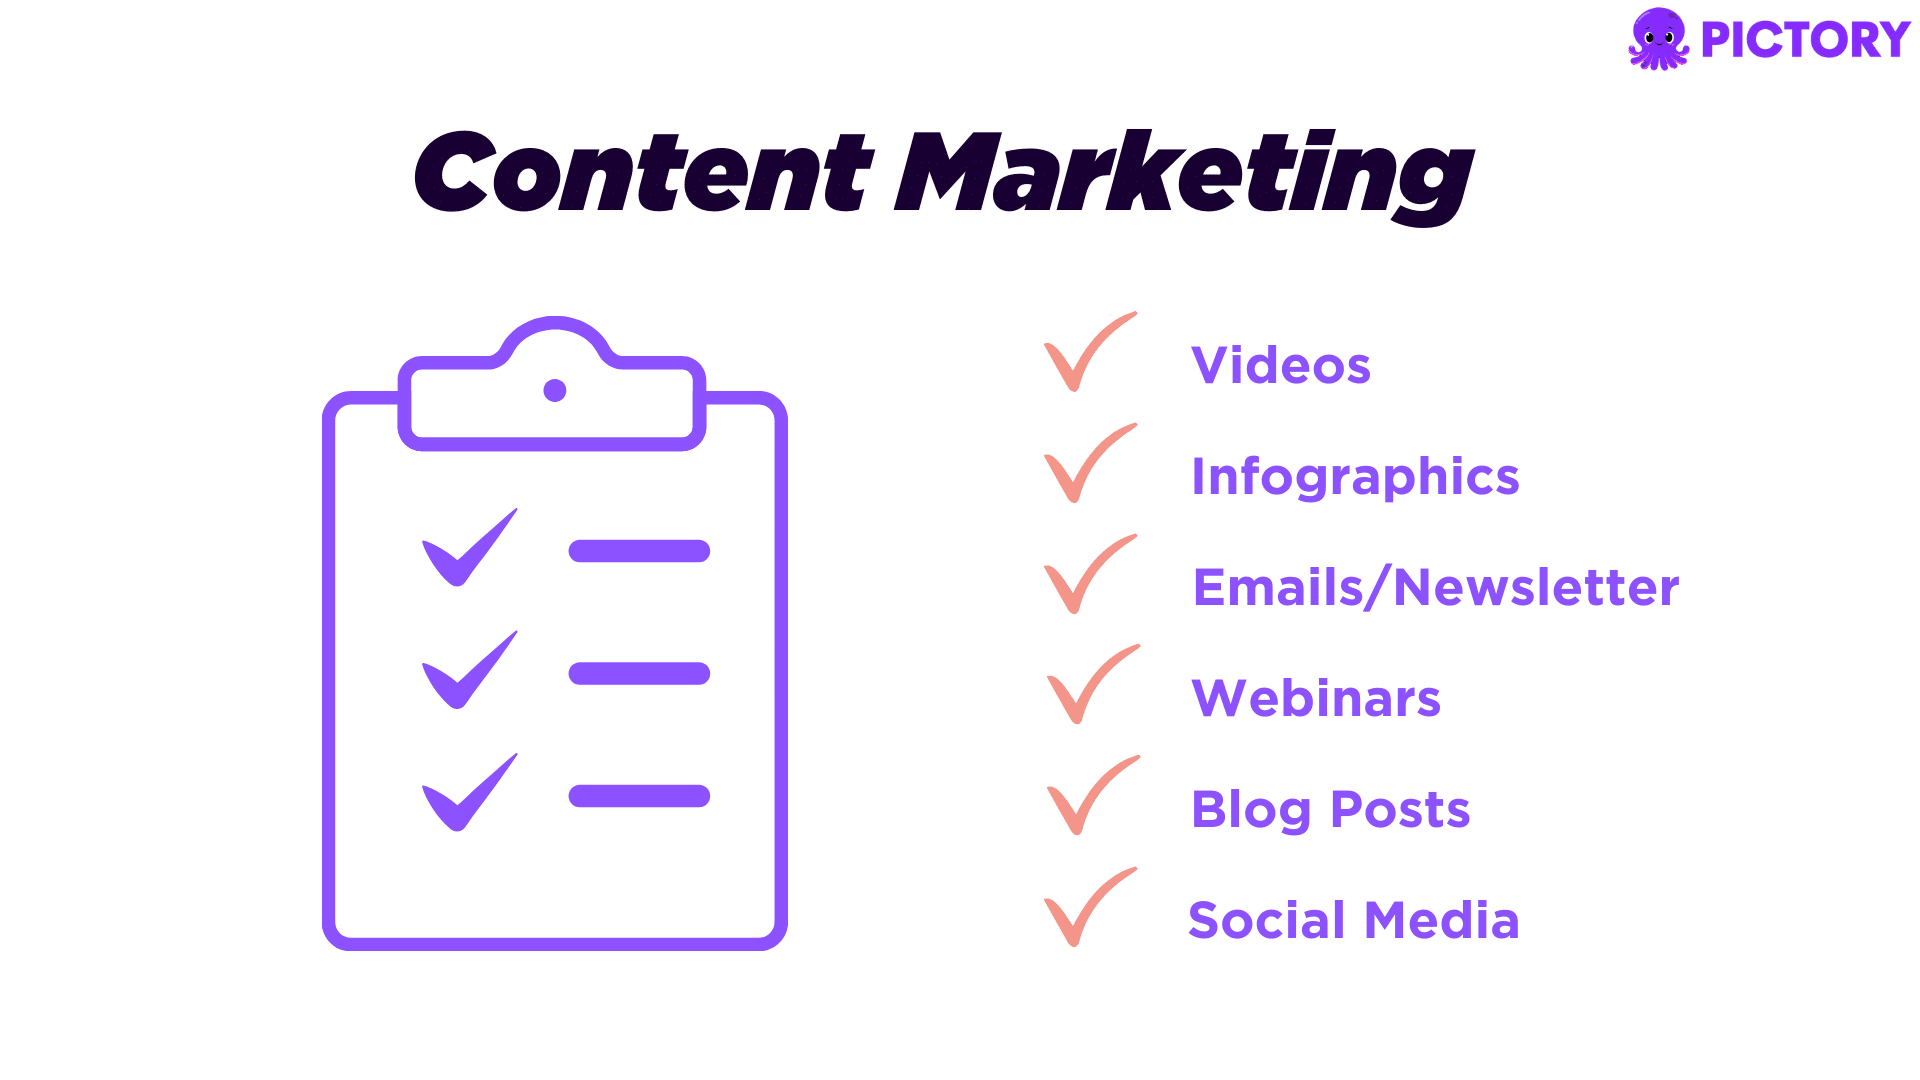 content marketing refers to the strategic sharing of online content in the form of blog articles, social media posts, email newsletters, etc. to promote a business.